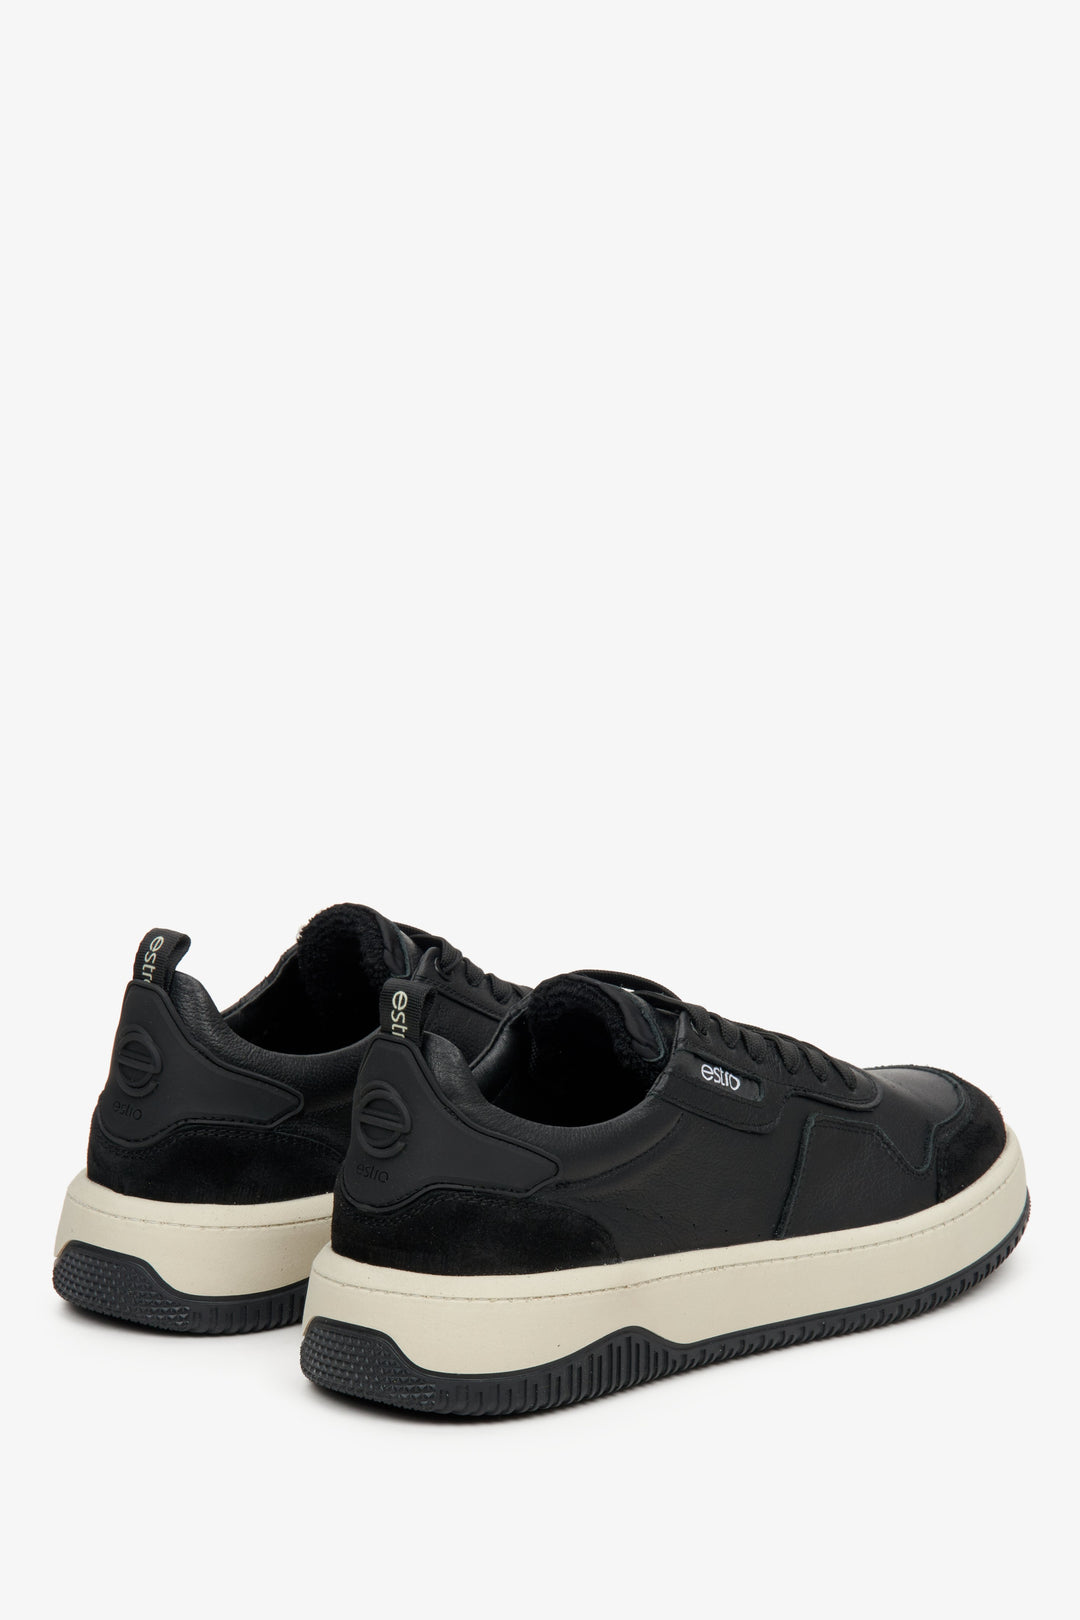 Men's low-top sneakers in black - a close-up on a heel counter.